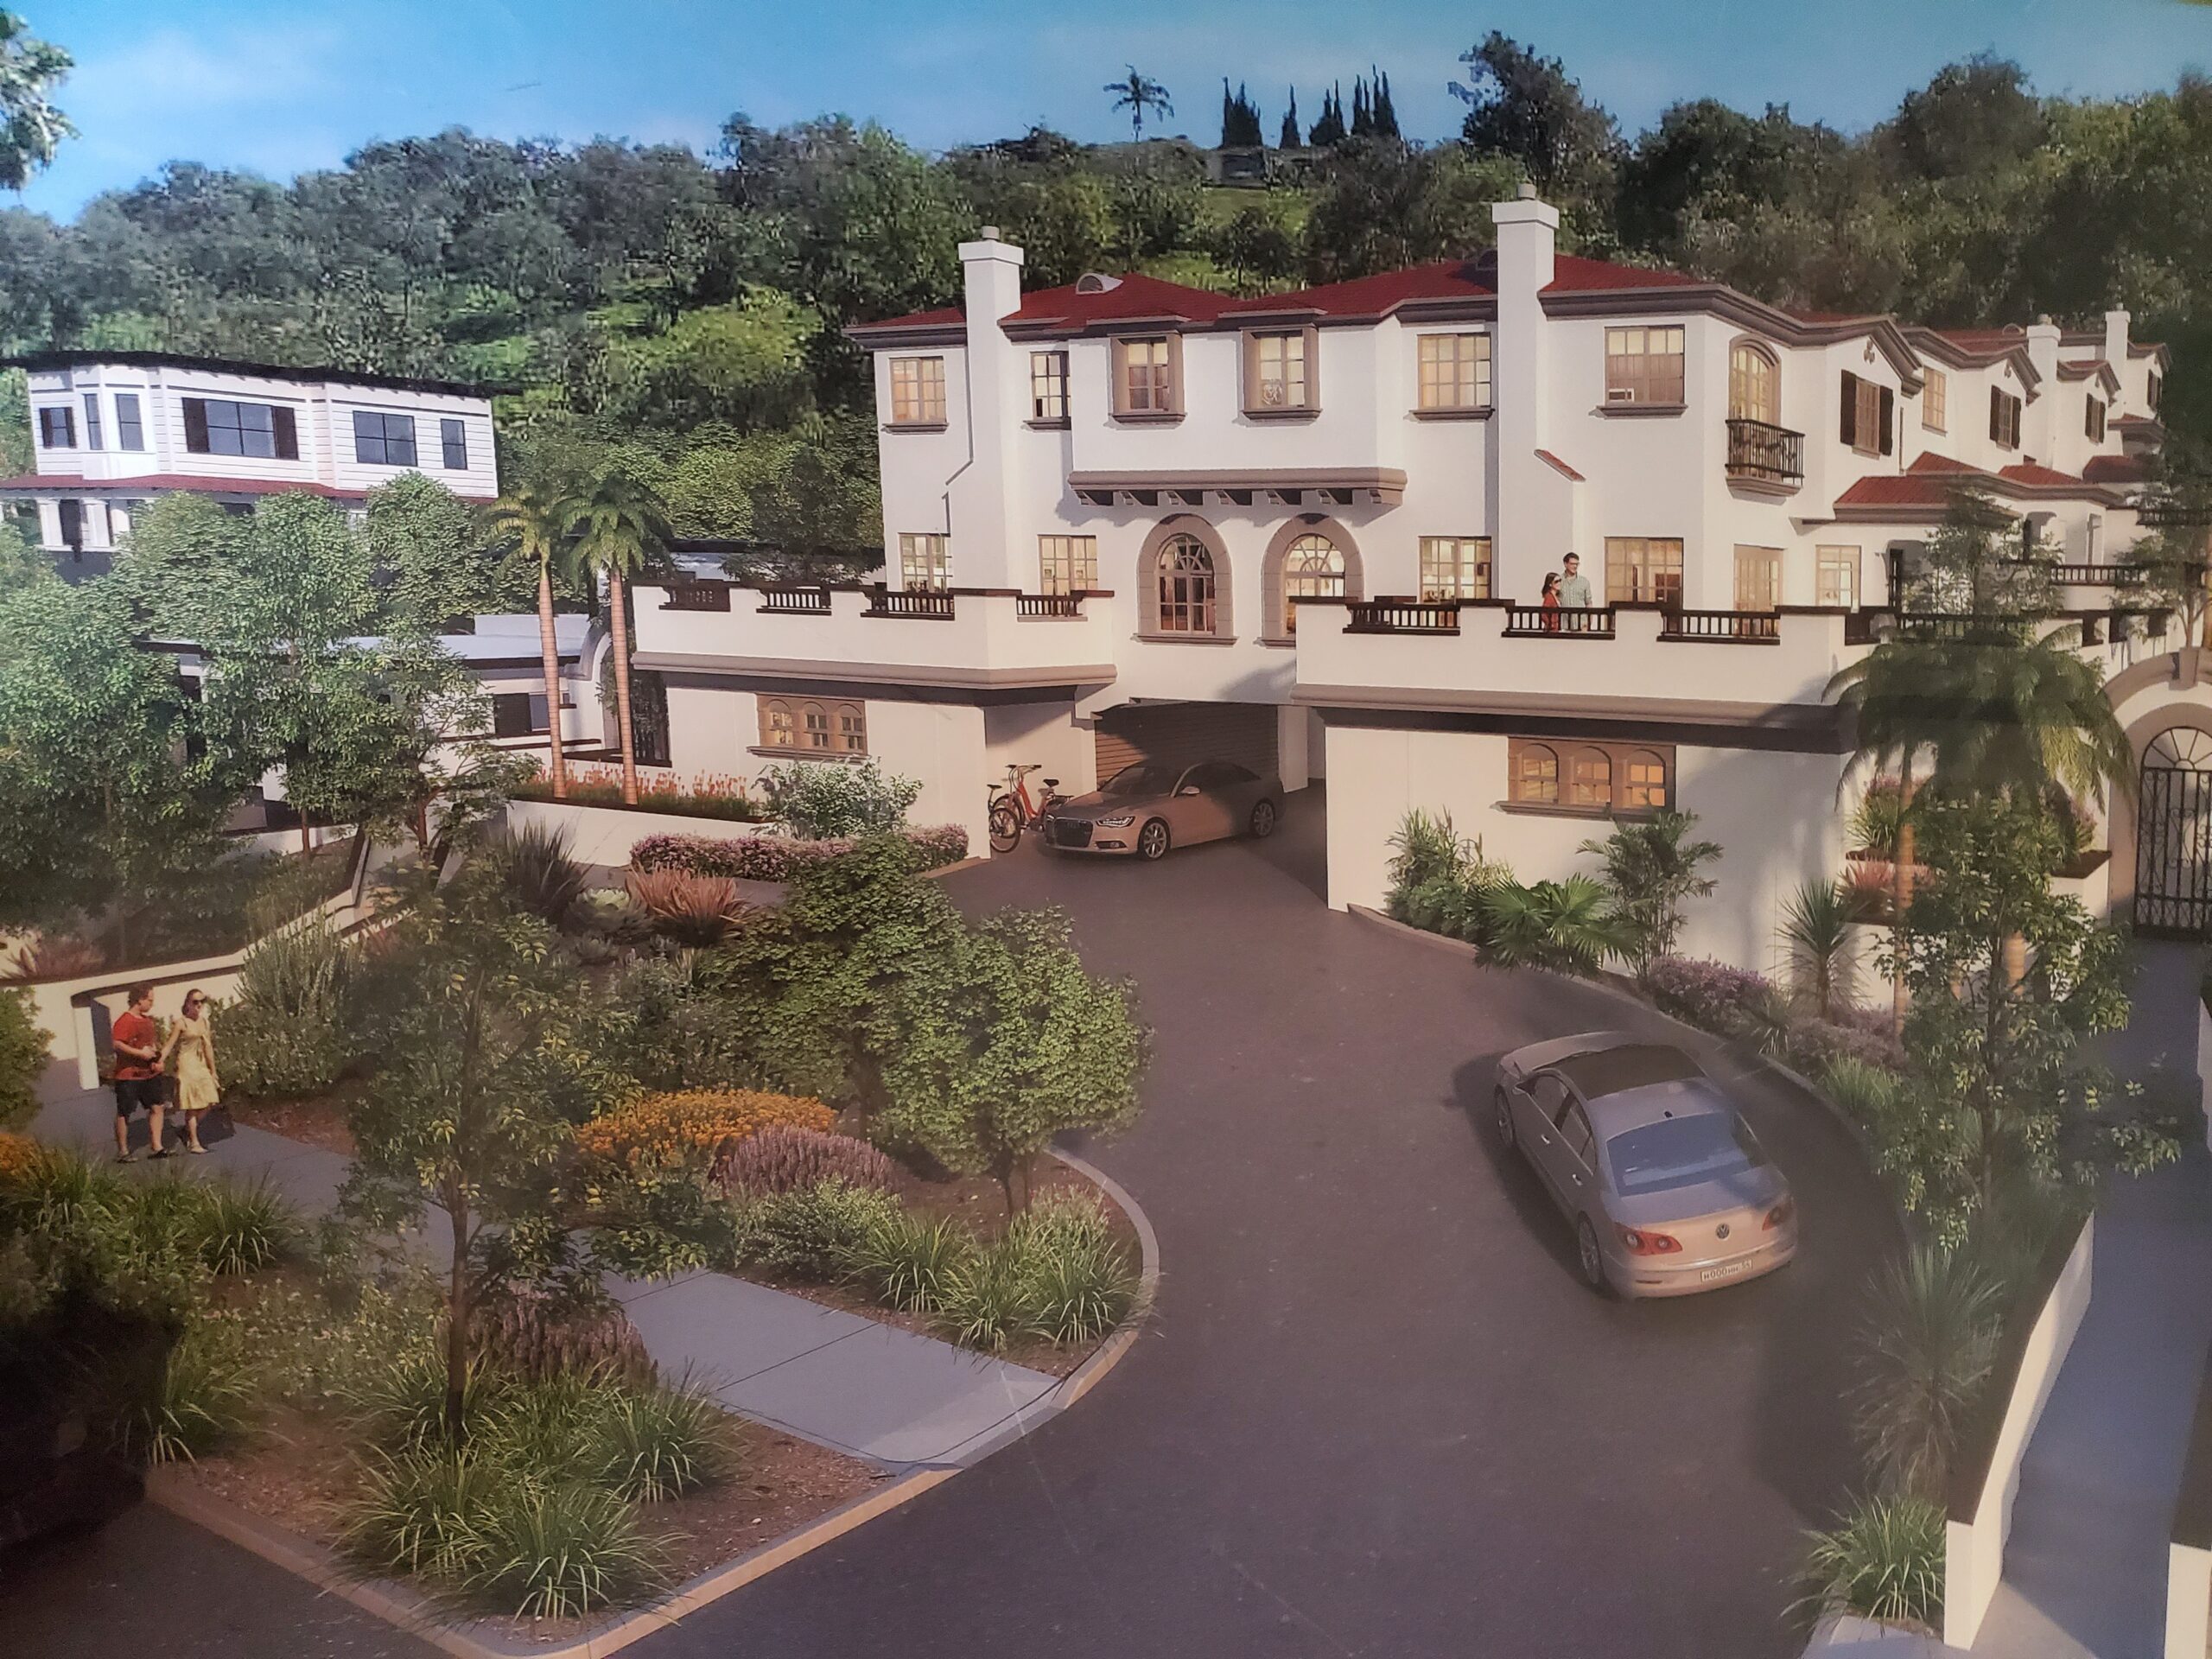 Rendering of Plans for a Luxury Multi-Family Building in South Pasadena, California - Nott & Associates Inc.